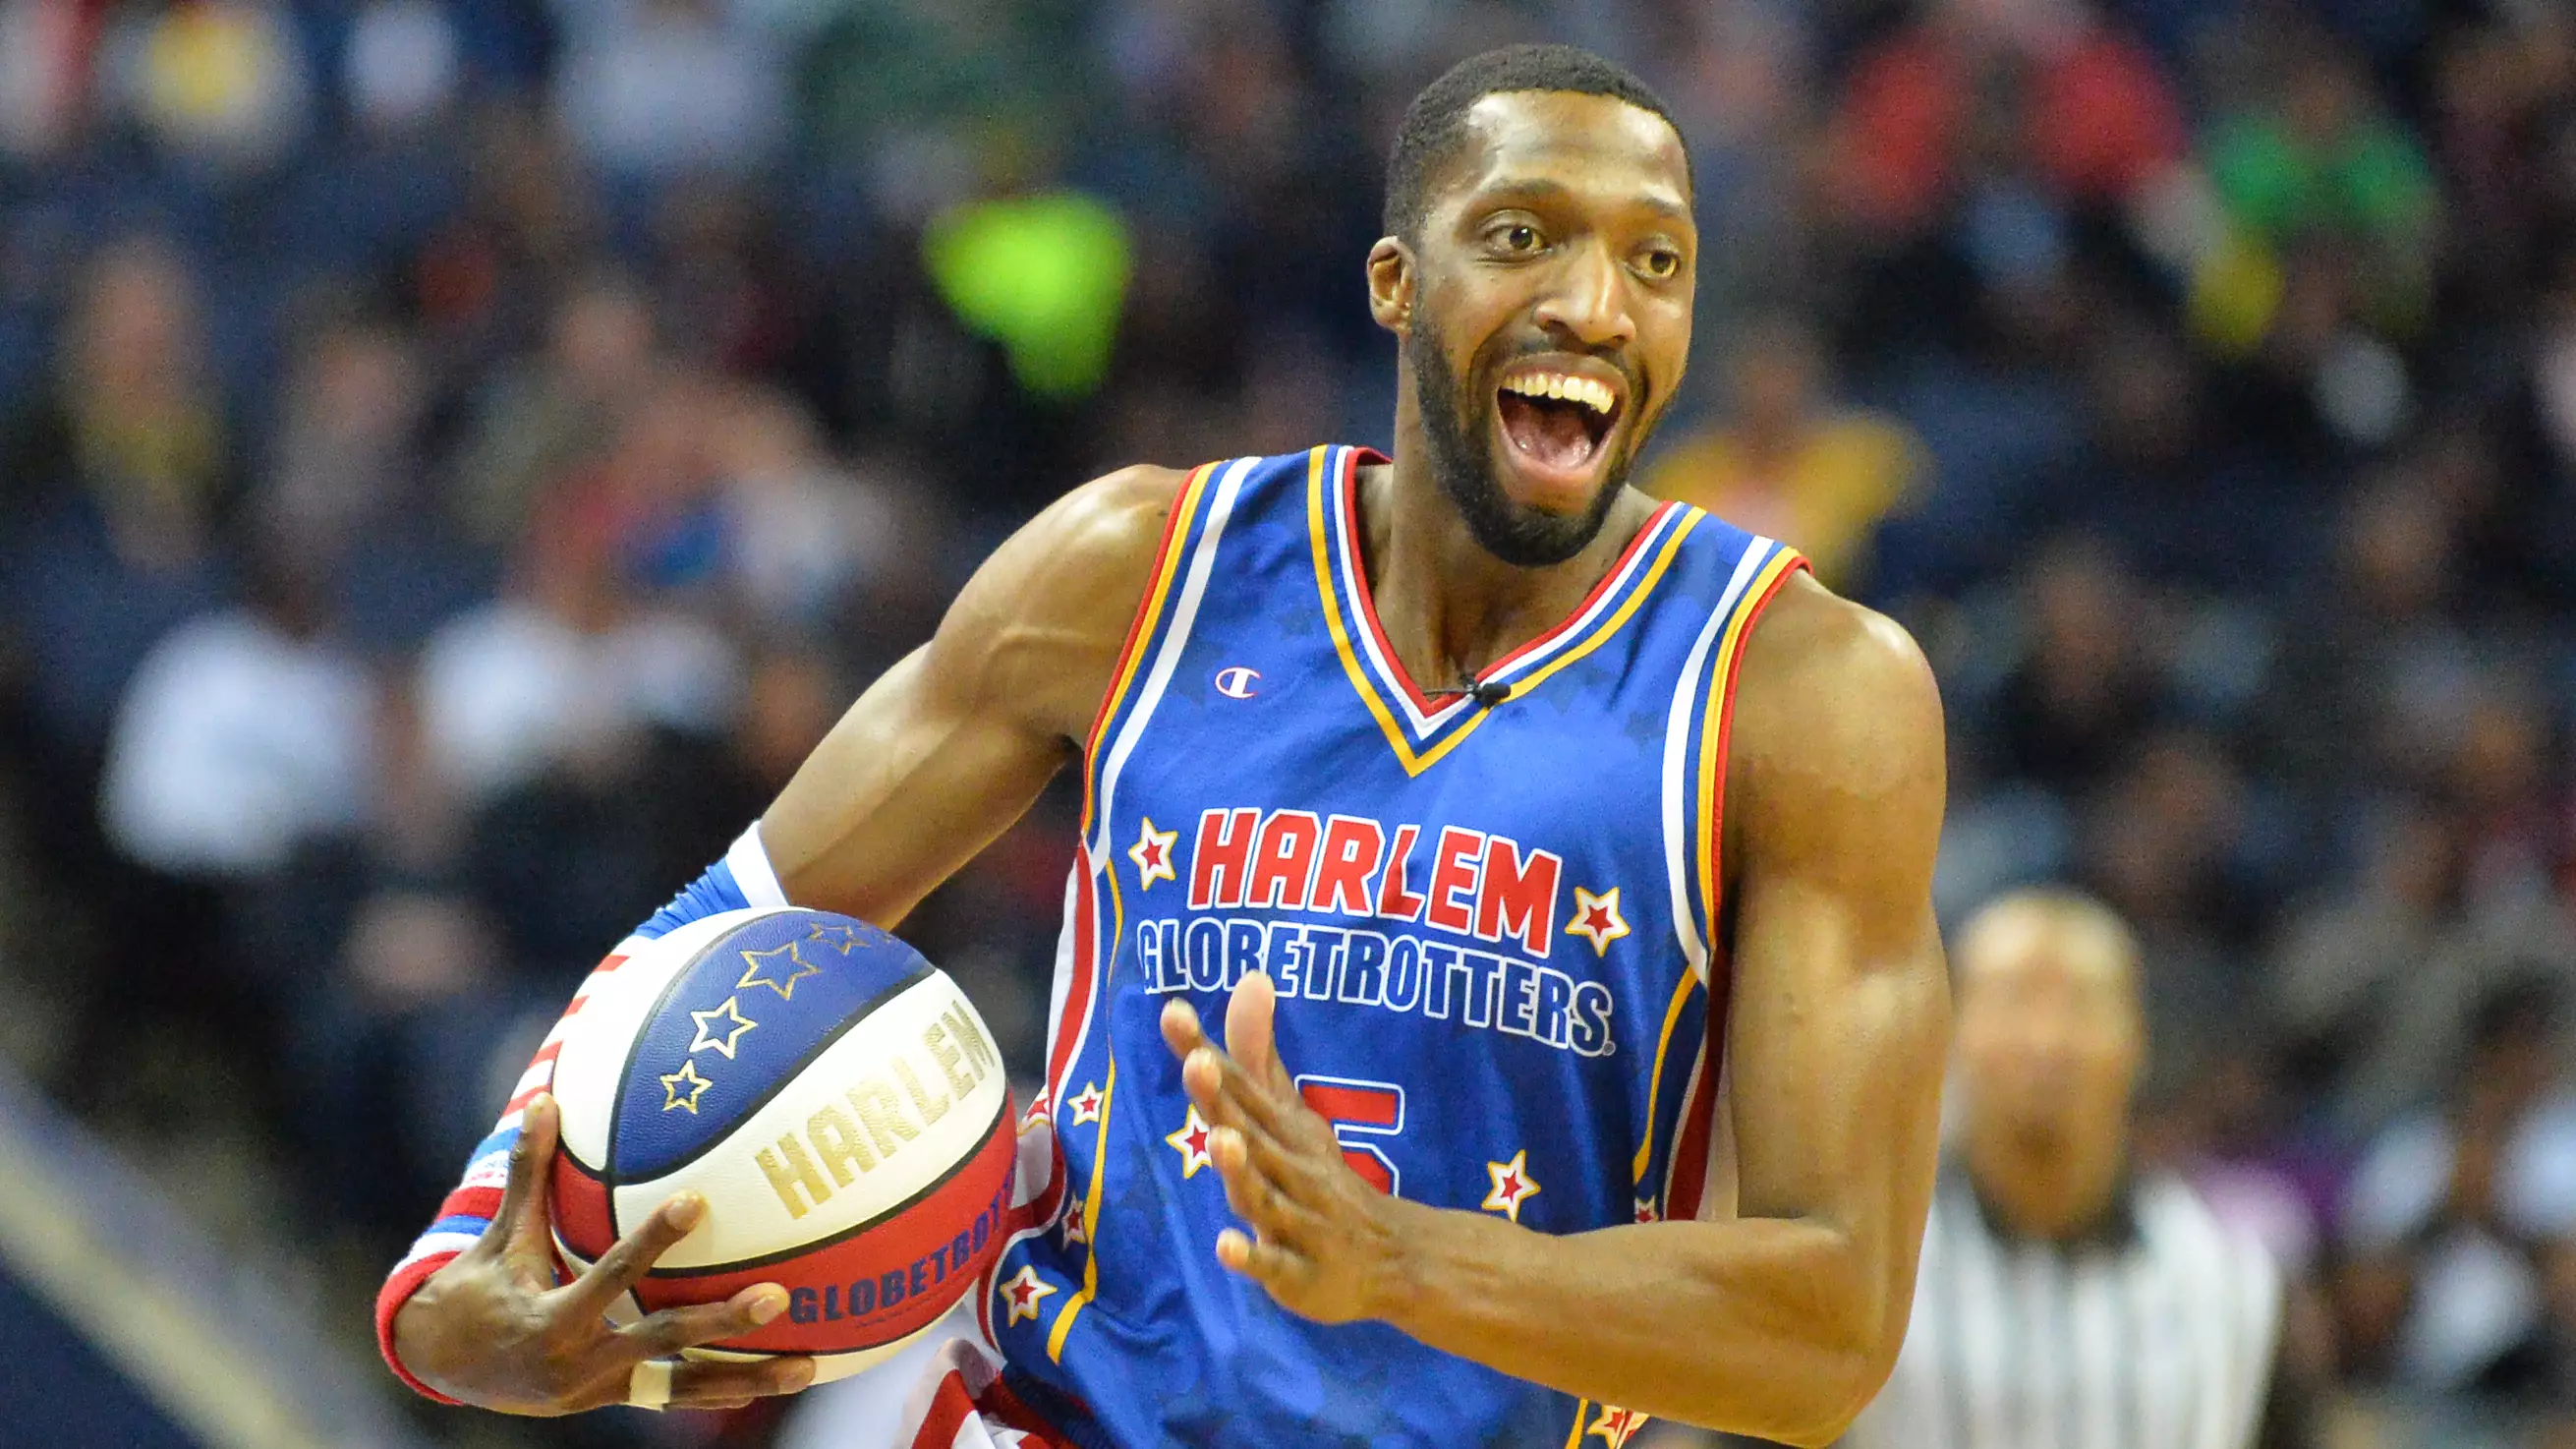 The Harlem Globetrotters Want To Form A Team To Join The NBA